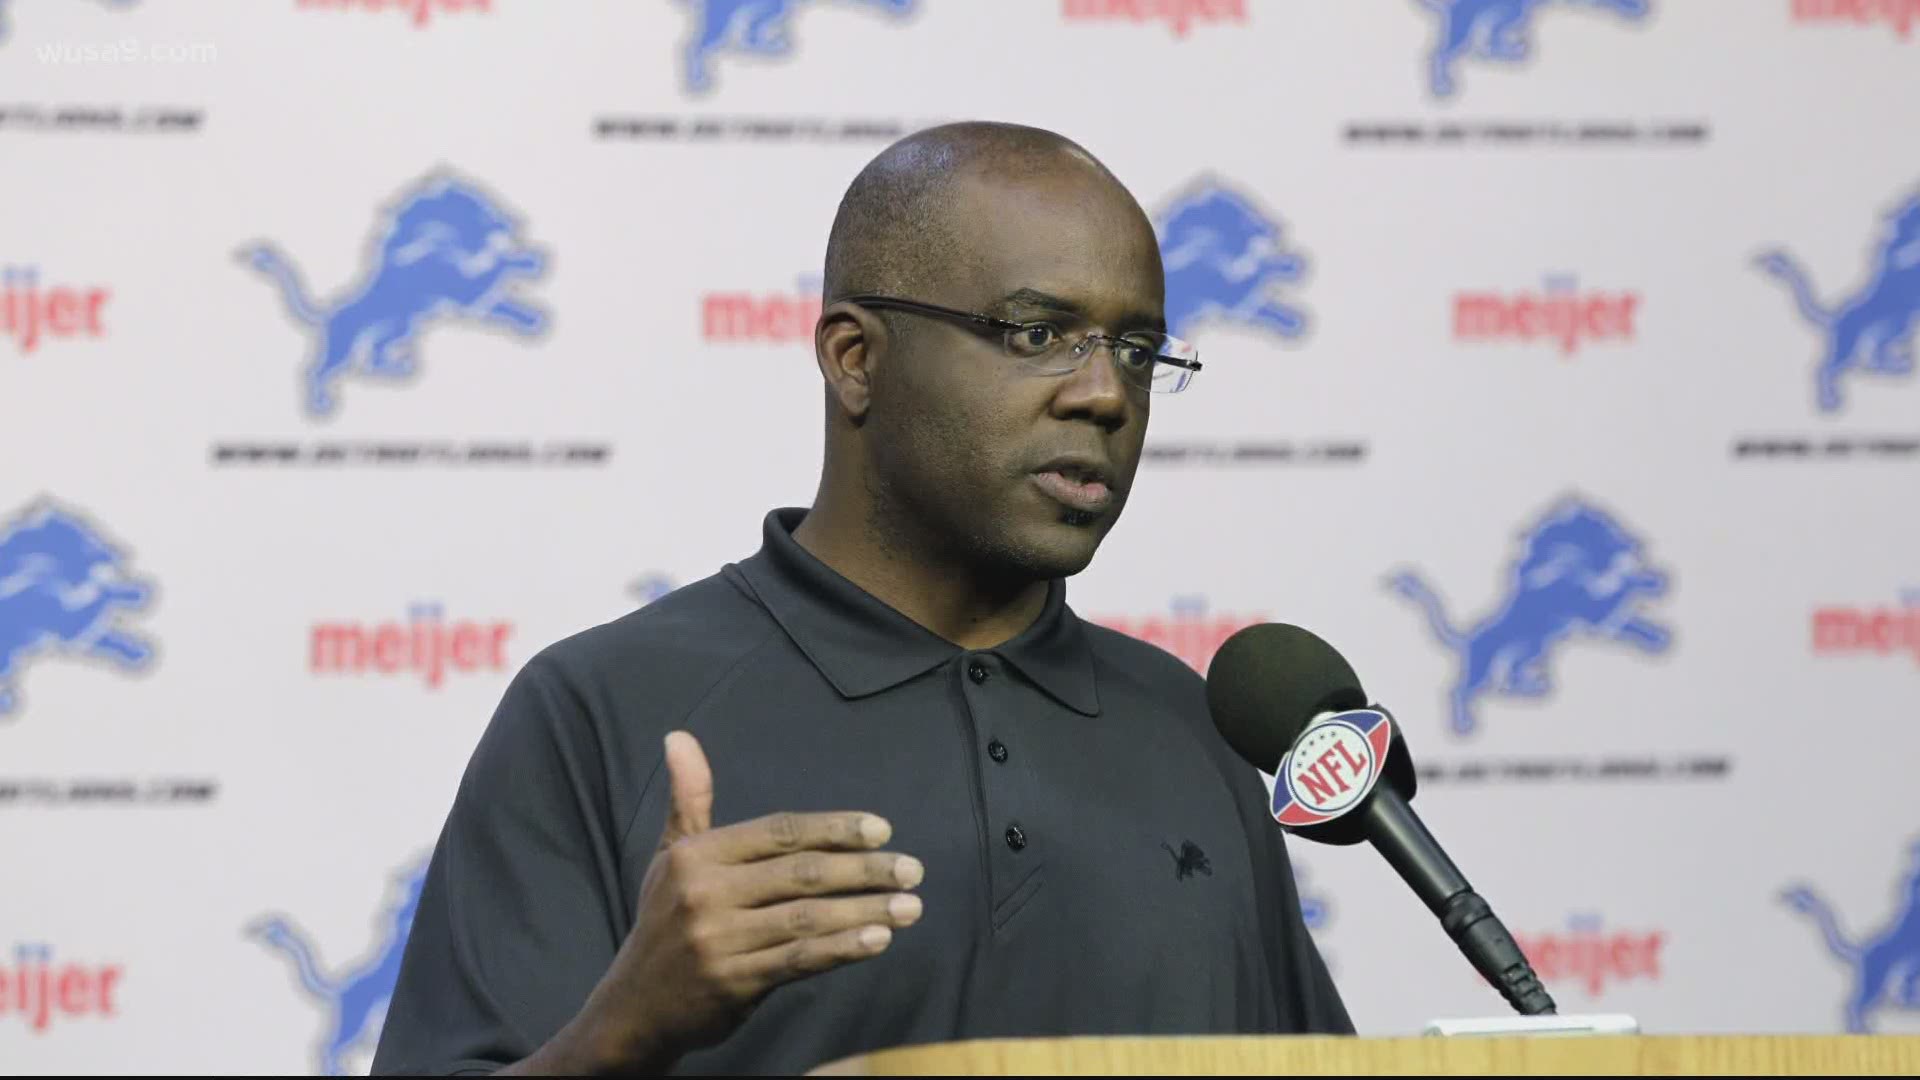 WFT has hired Martin Mayhew as the new GM, who joins team President Jason Wright. Mayhew played 9 seasons in the NFL, winning a Super Bowl with Washington in 1992.